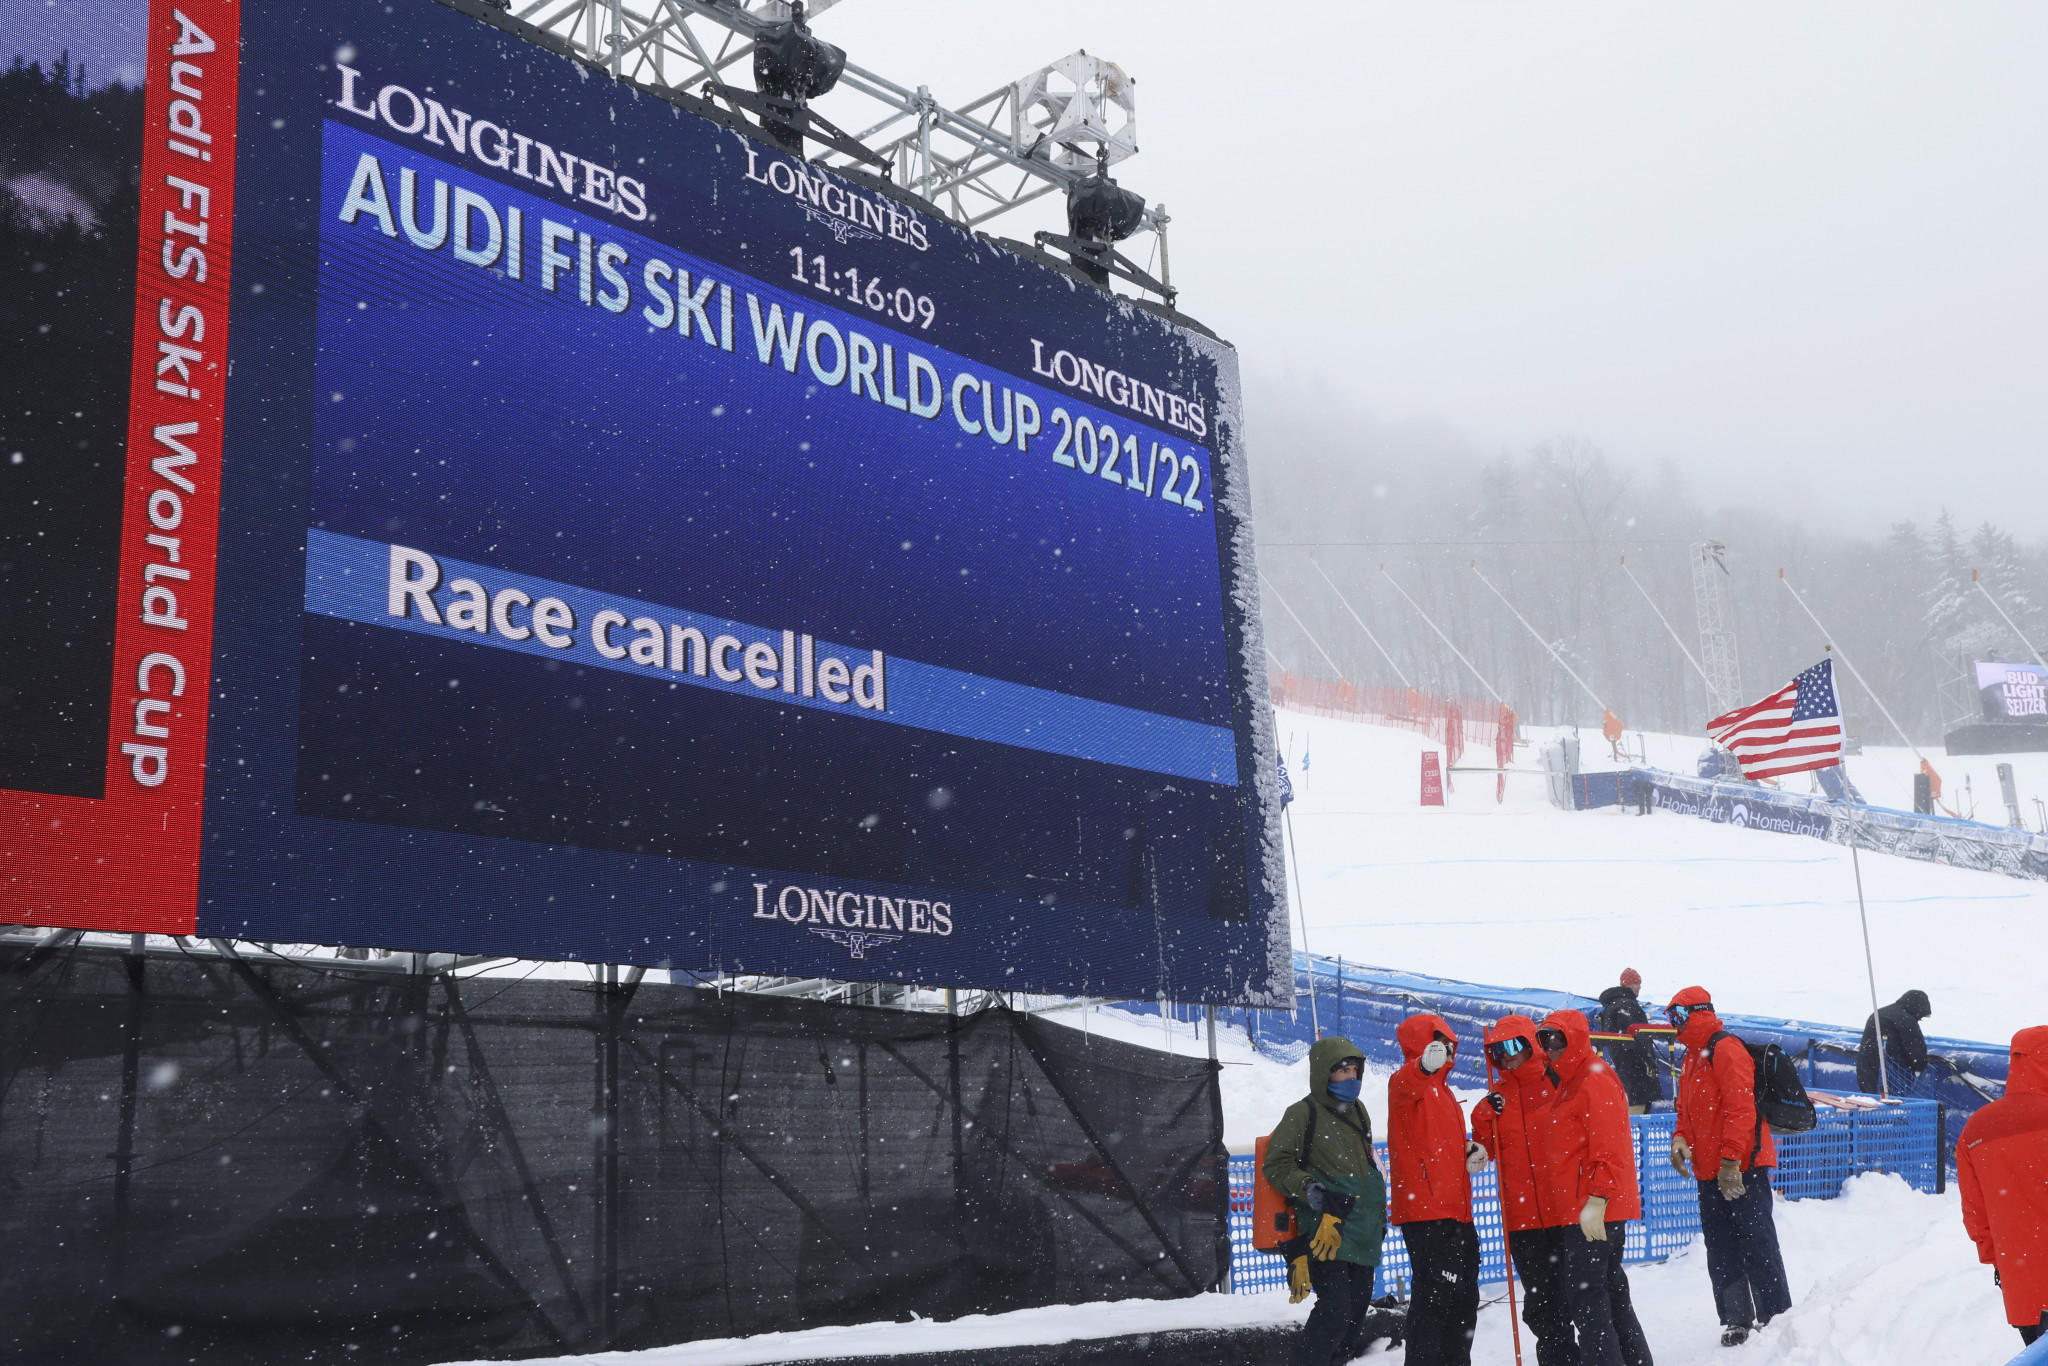 Giant slalom at women's FIS Alpine Ski World Cup cancelled due to high winds